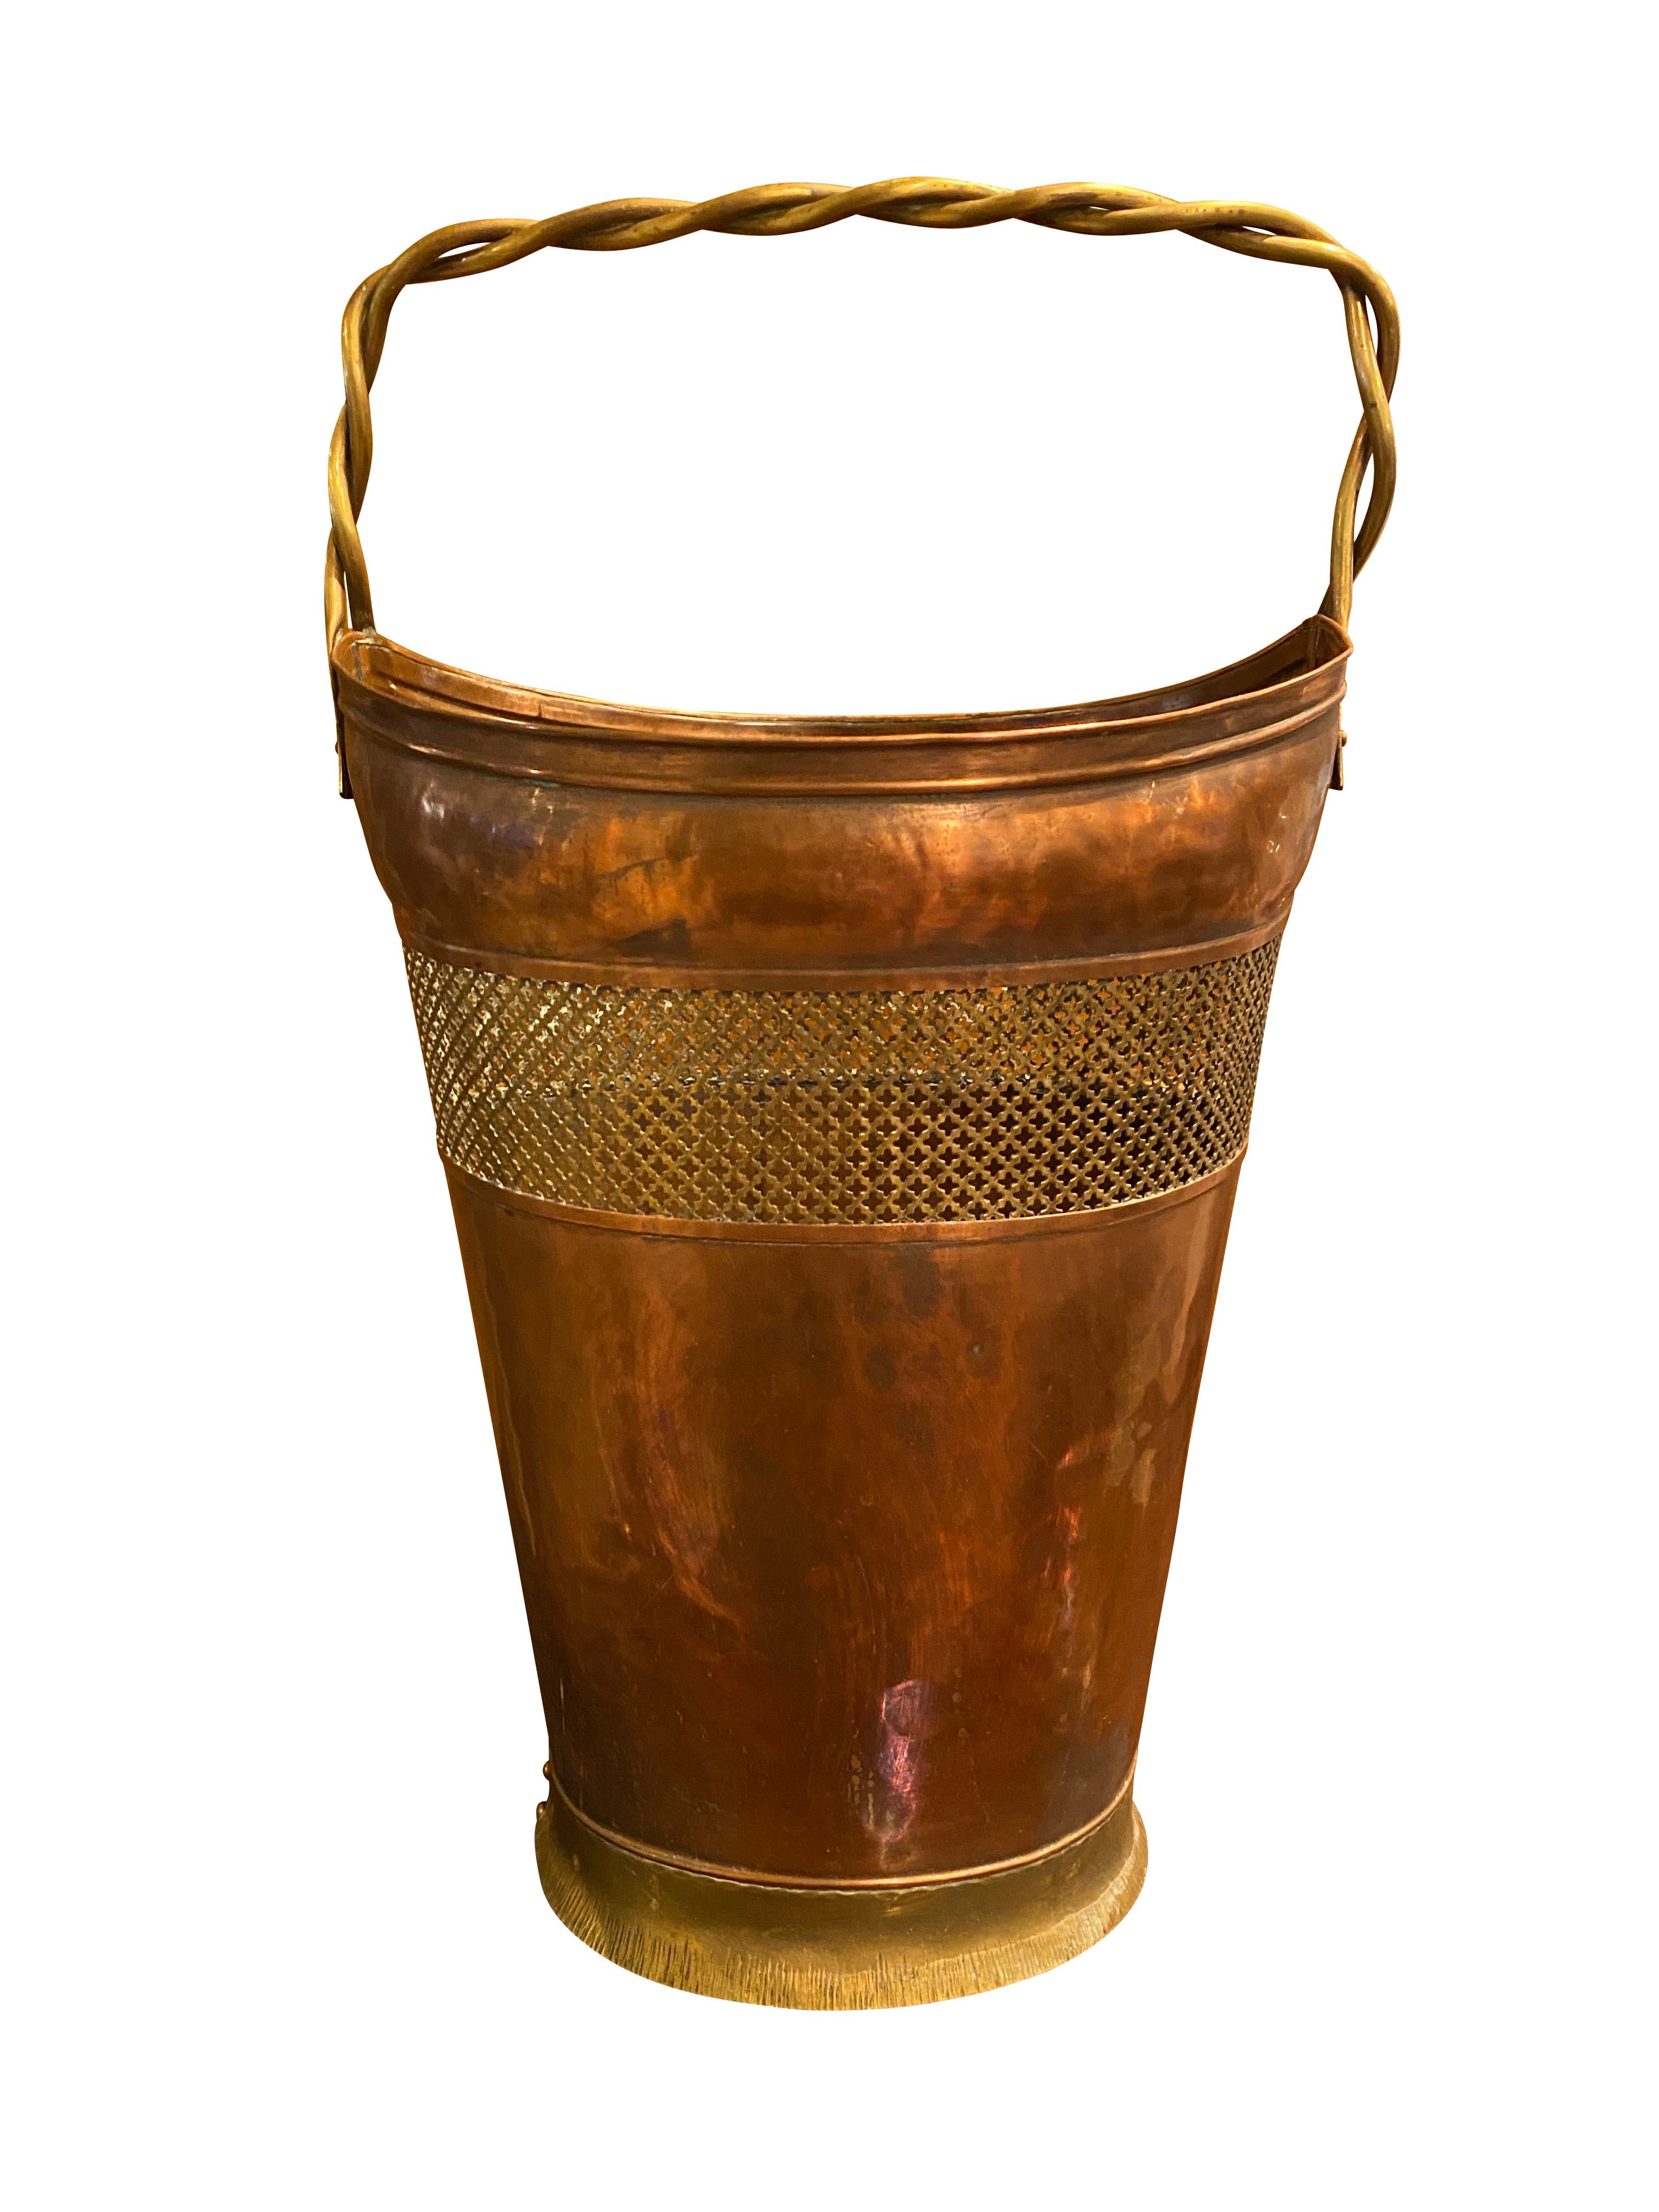 European English Copper and Brass Fireplace Basket For Sale